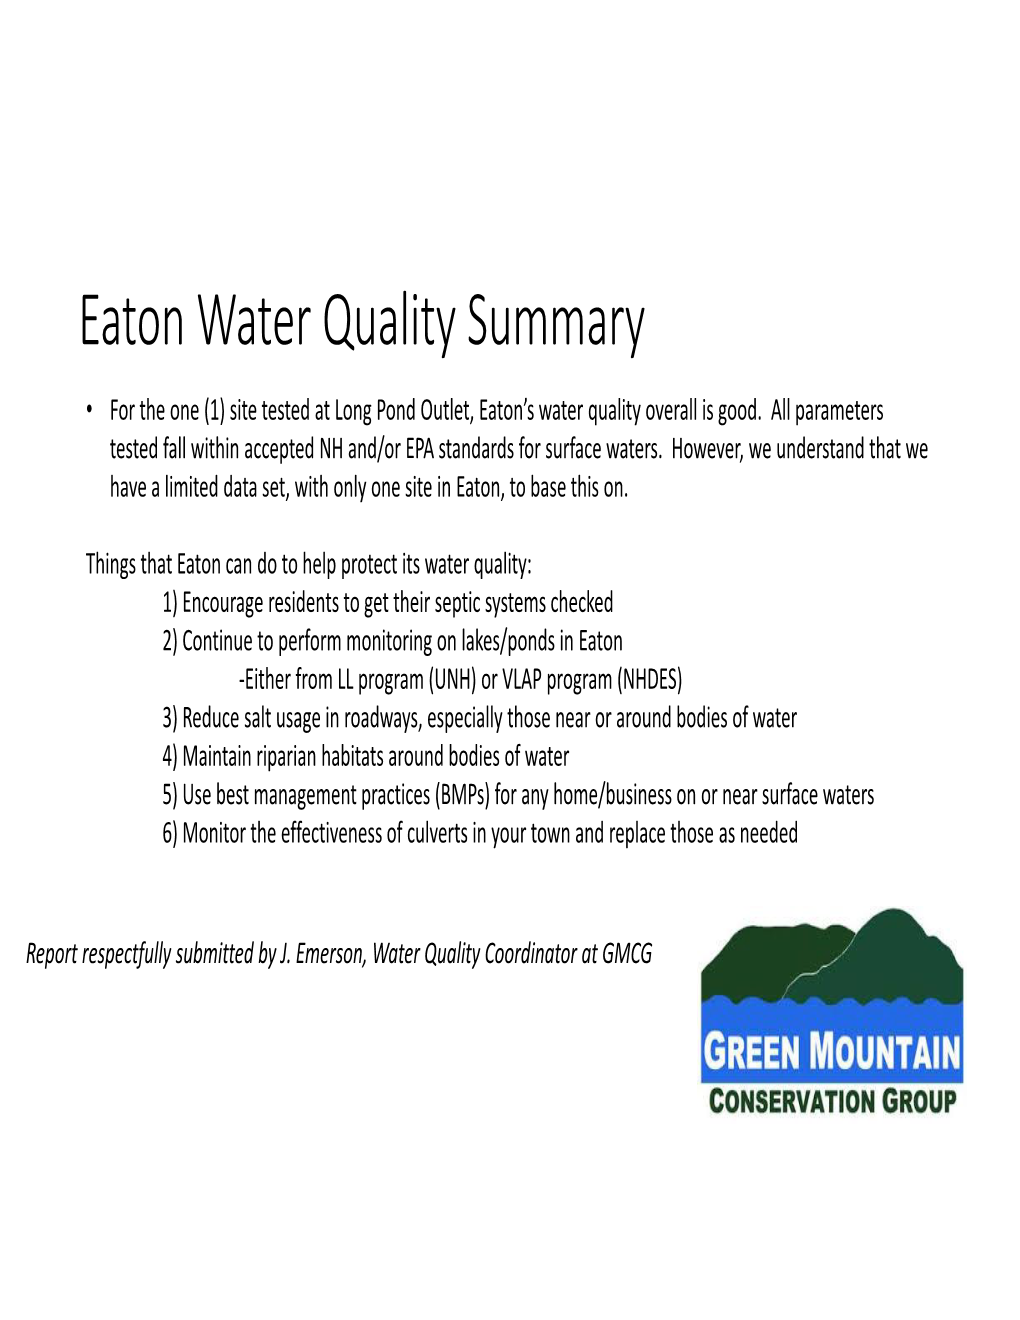 Eaton Water Quality Summary • for the One (1) Site Tested at Long Pond Outlet, Eaton’S Water Quality Overall Is Good